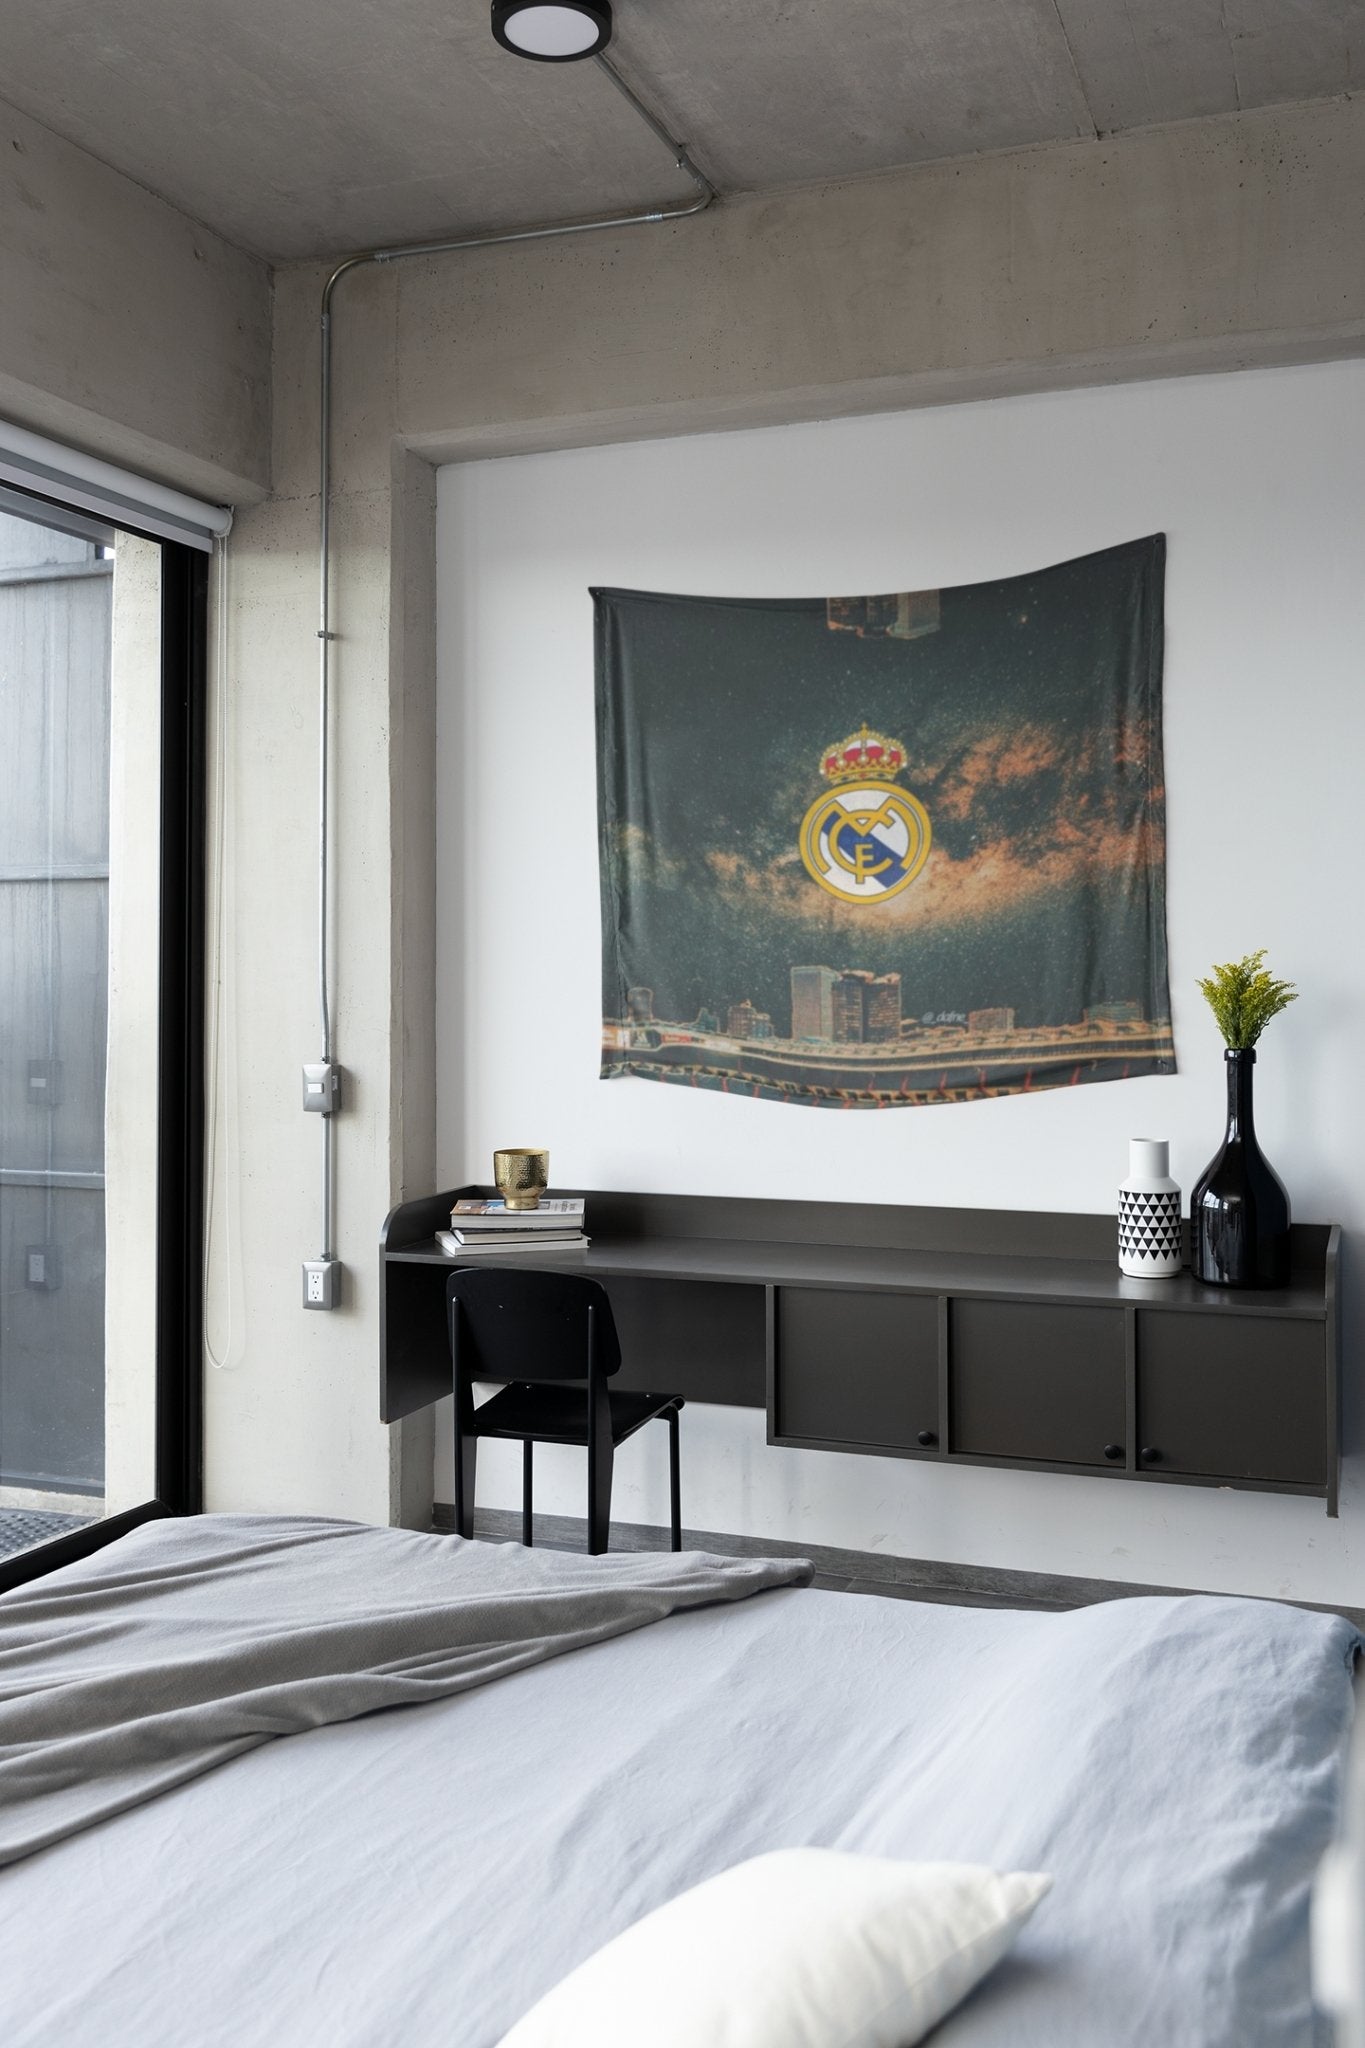 Real Madrid Tapestry